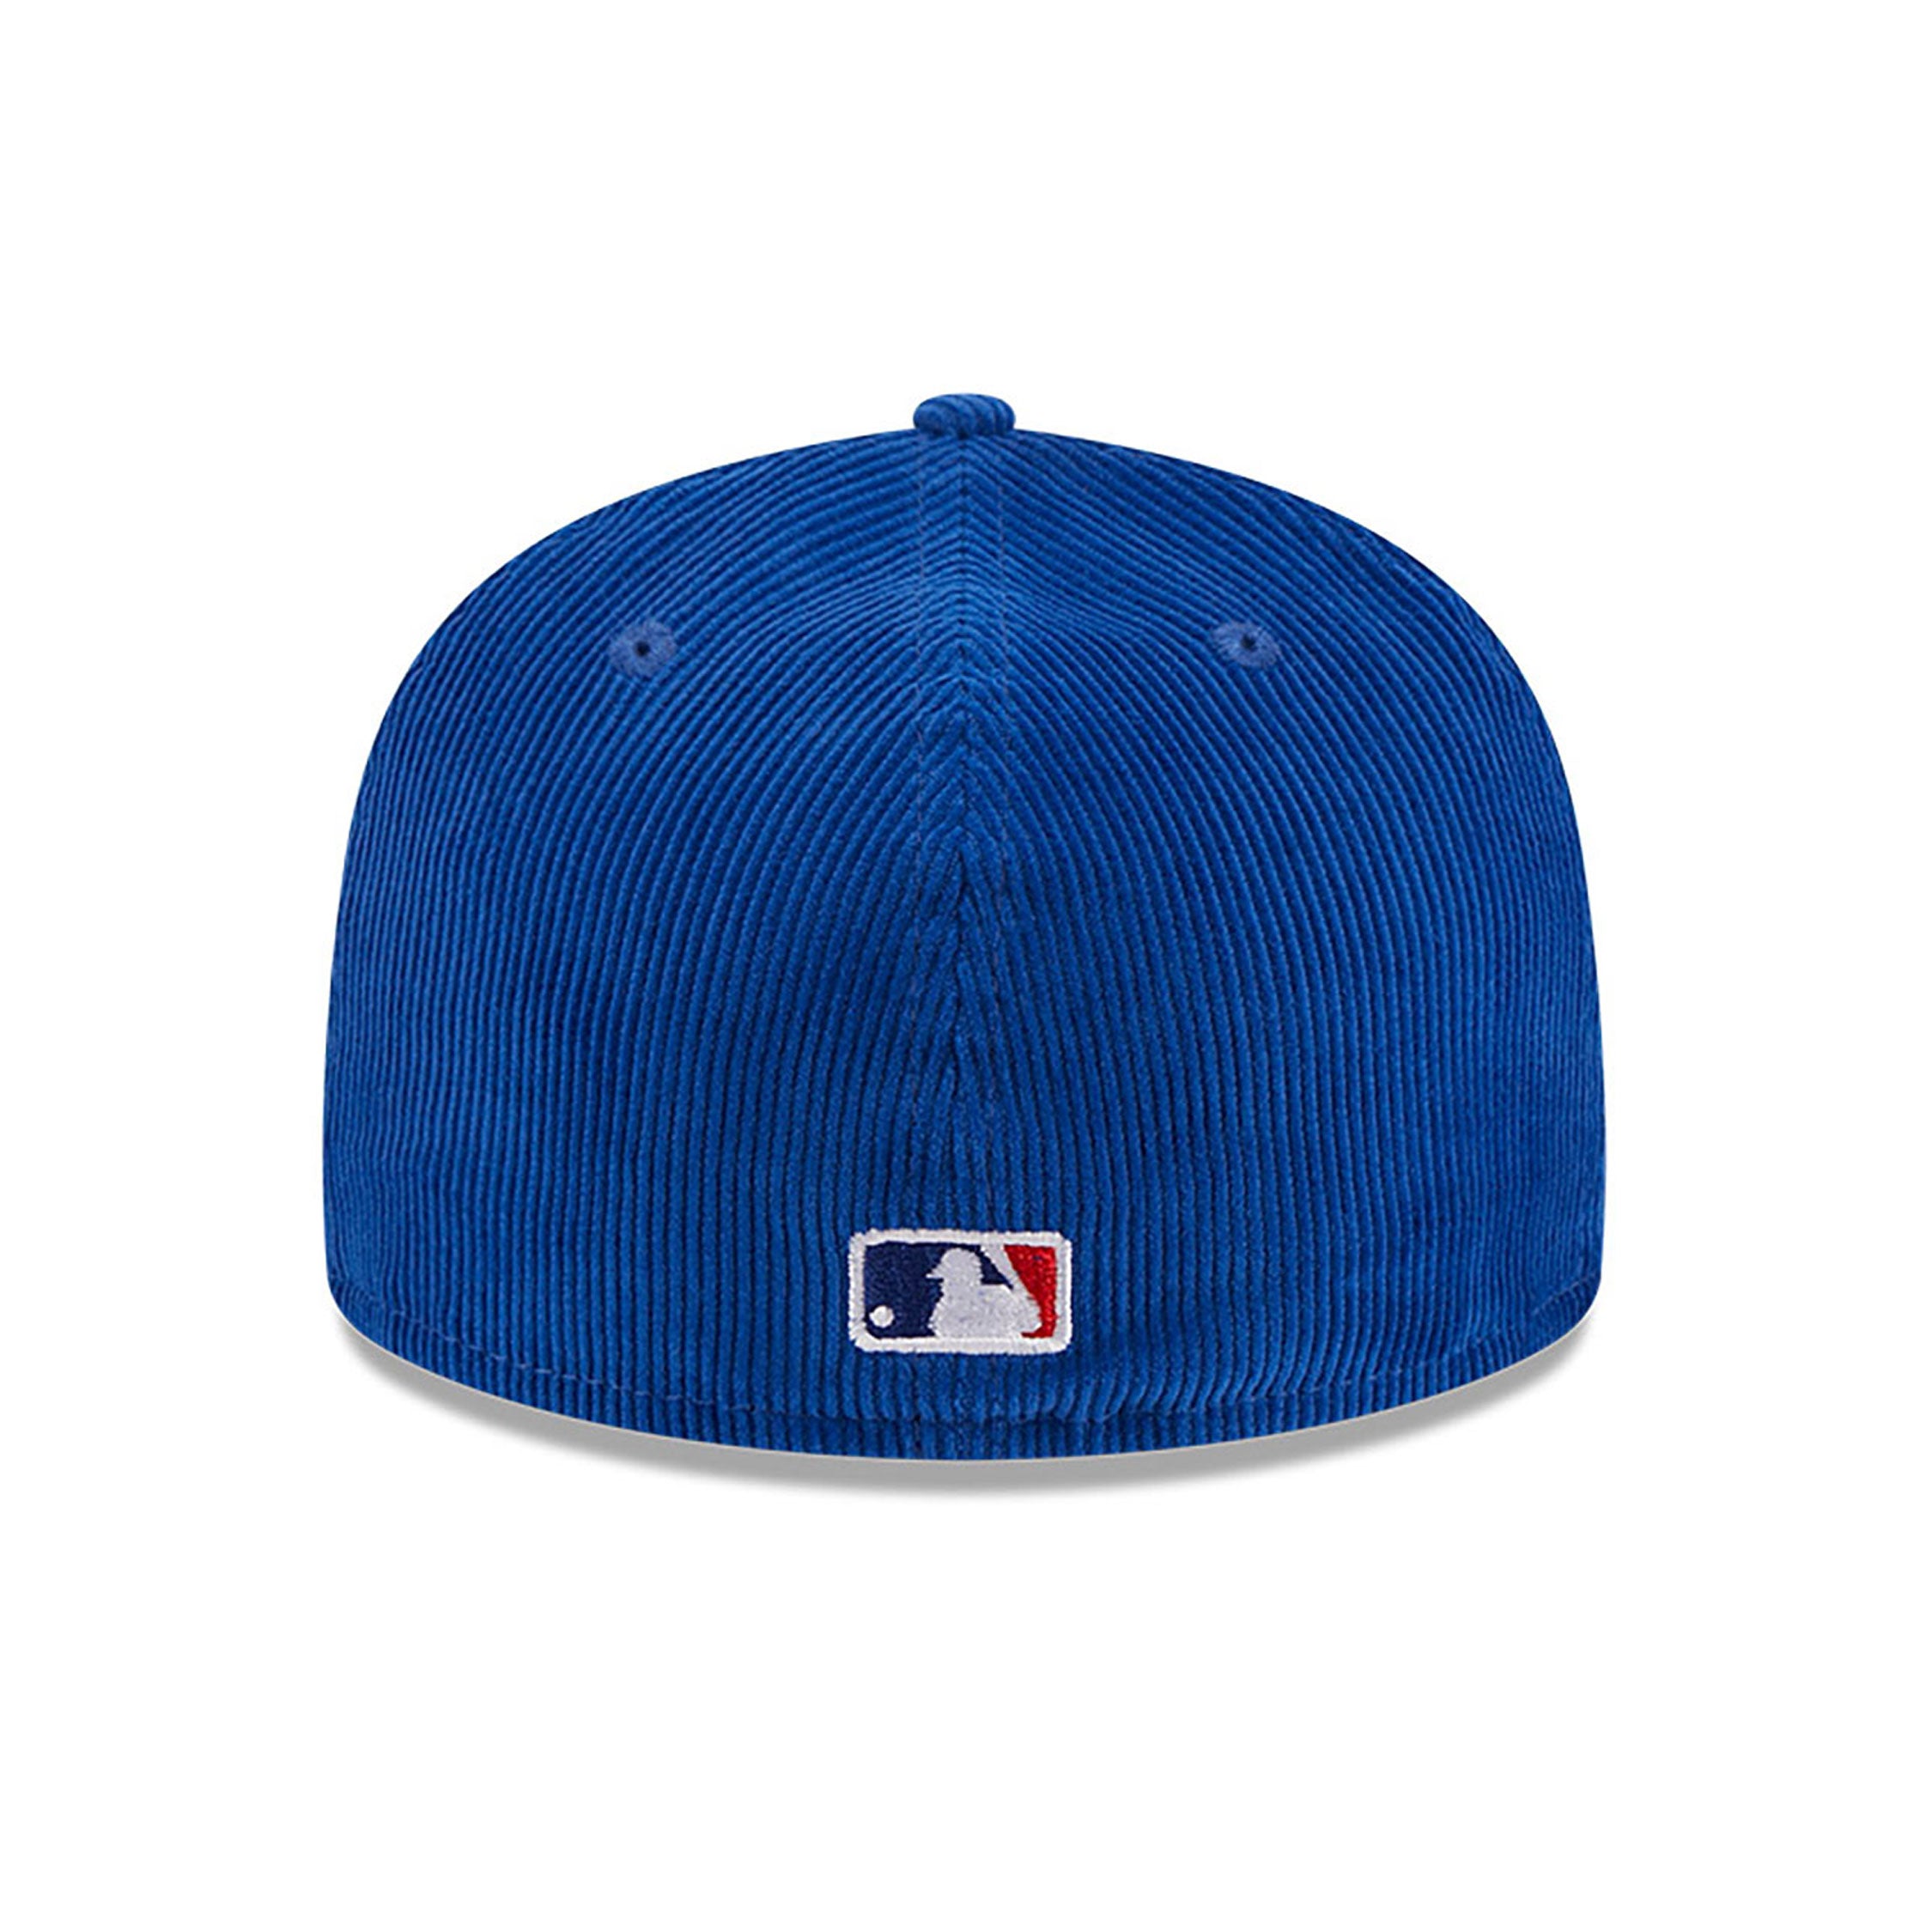 NEW ERA 59FIFTY MLB THROWBACK CORD LOS ANGELES DODGERS BLUE FITTED CAP